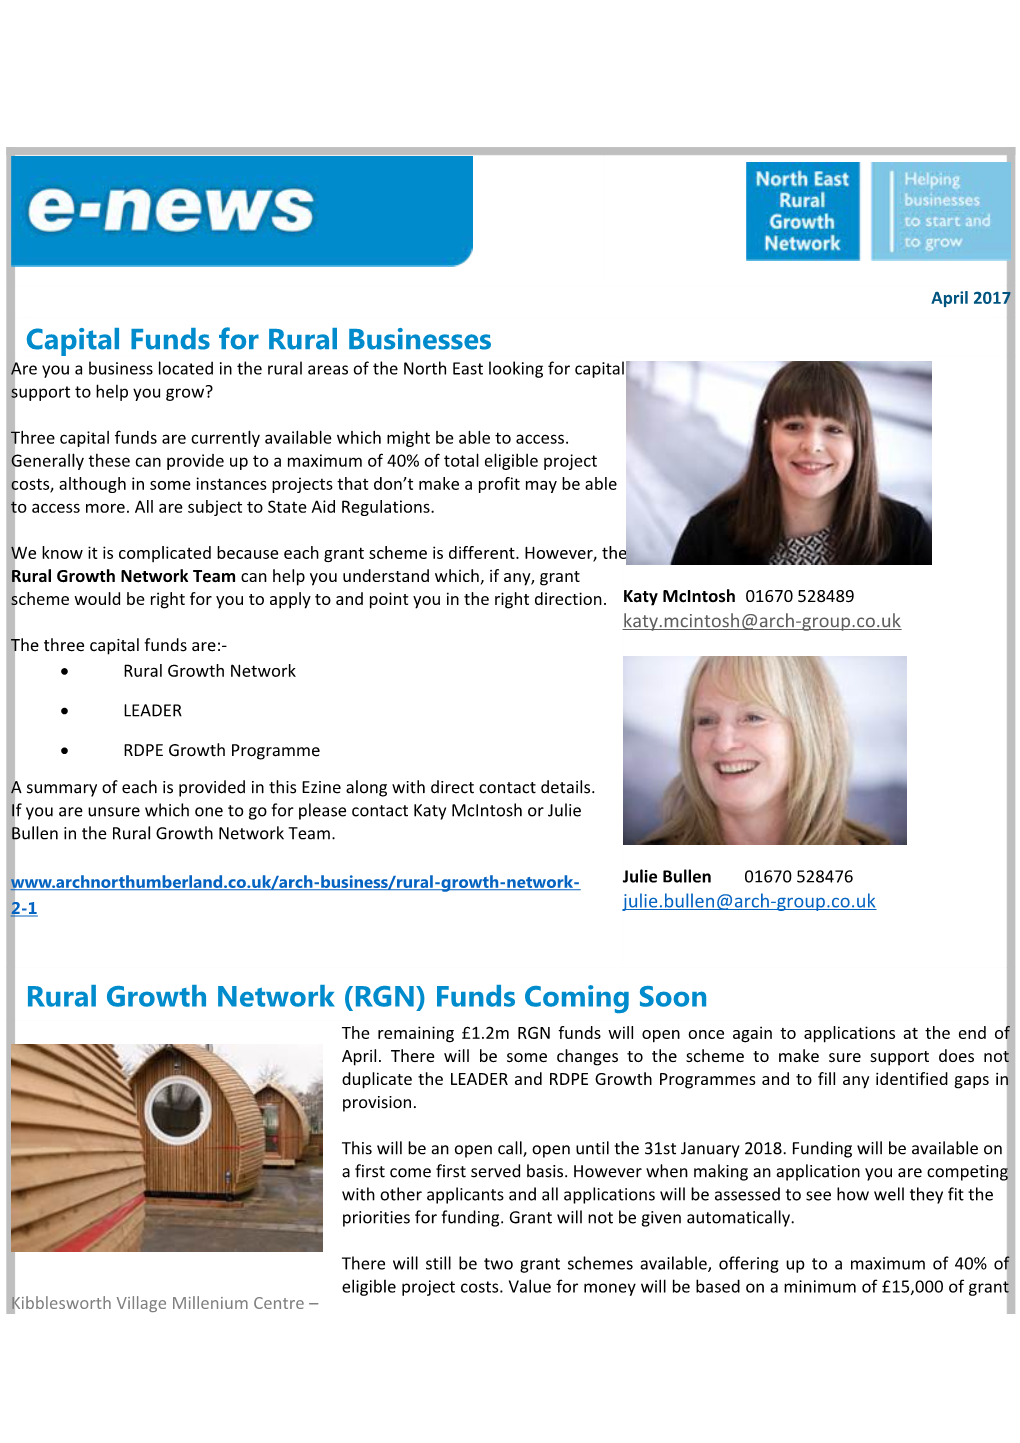 Rural Growth Network (RGN) Funds Coming Soon